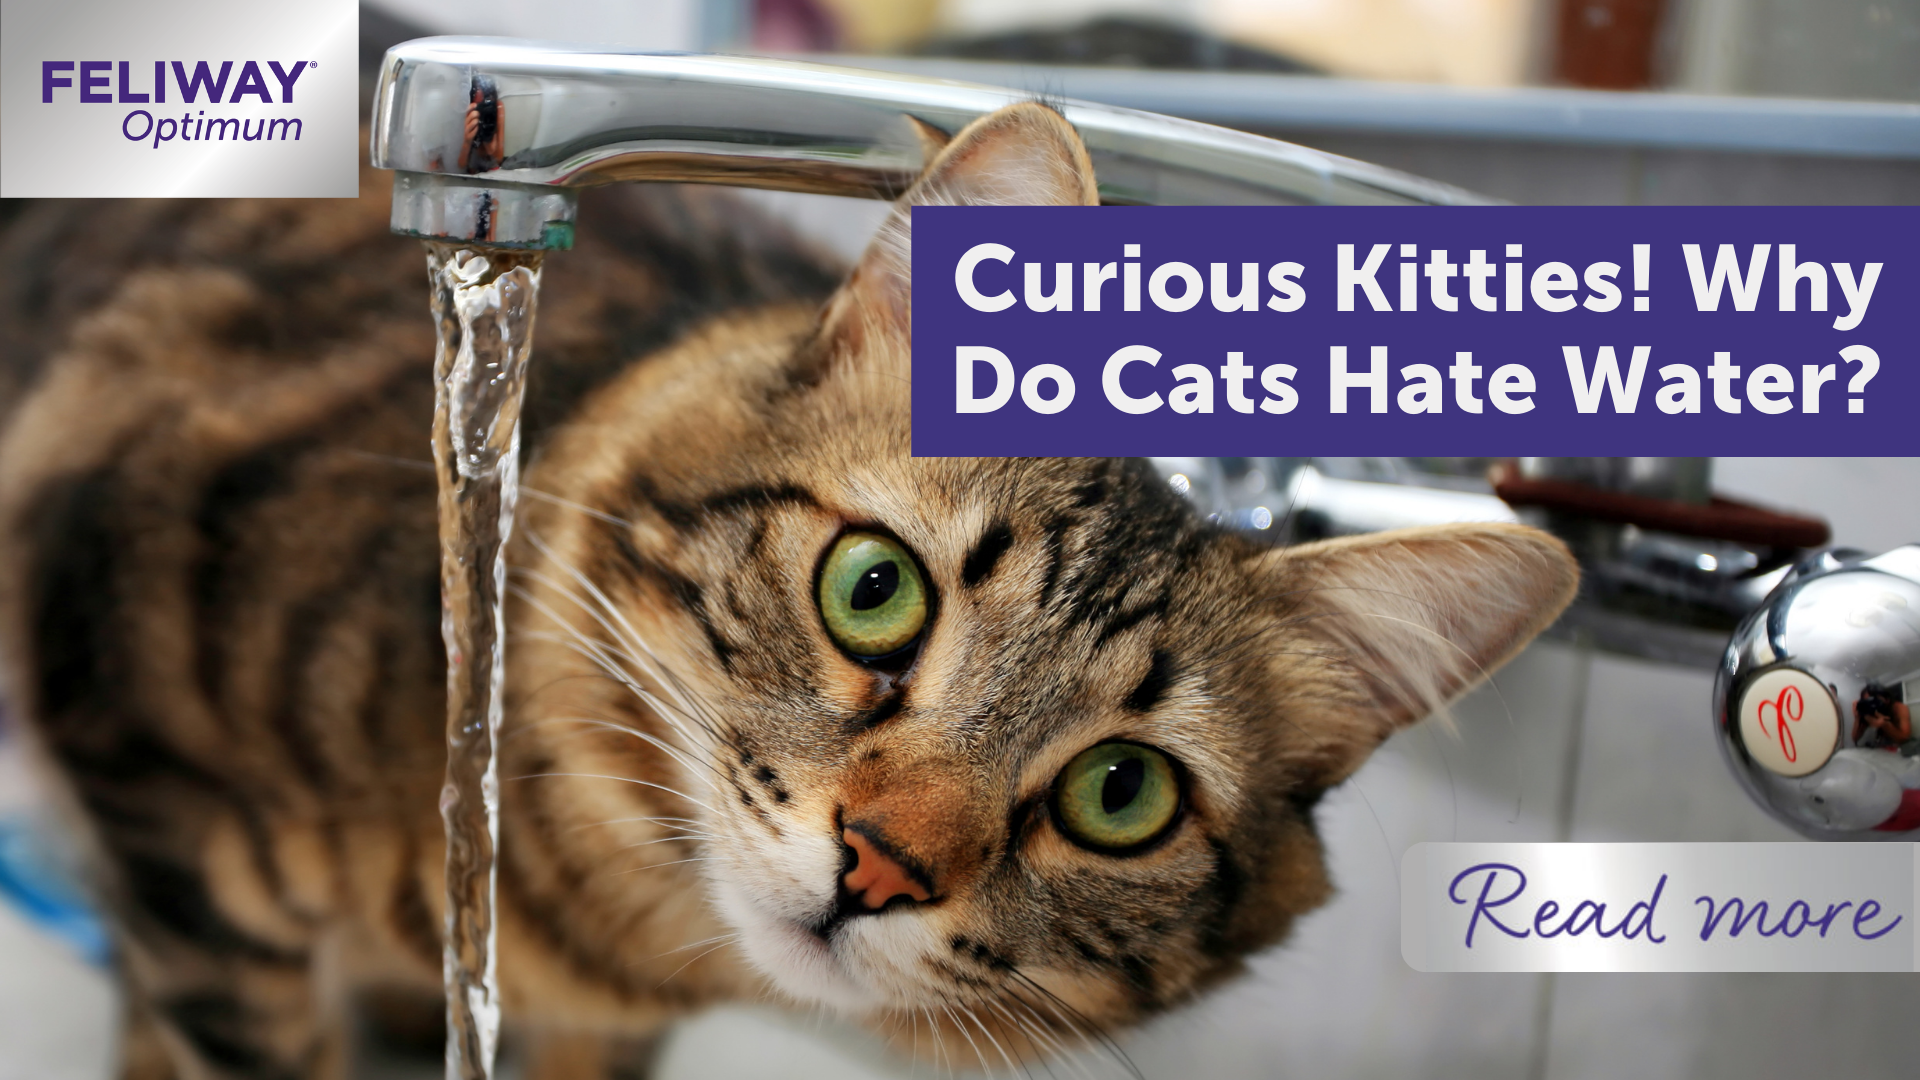 Curious Kitties! Why Do Cats Hate Water?